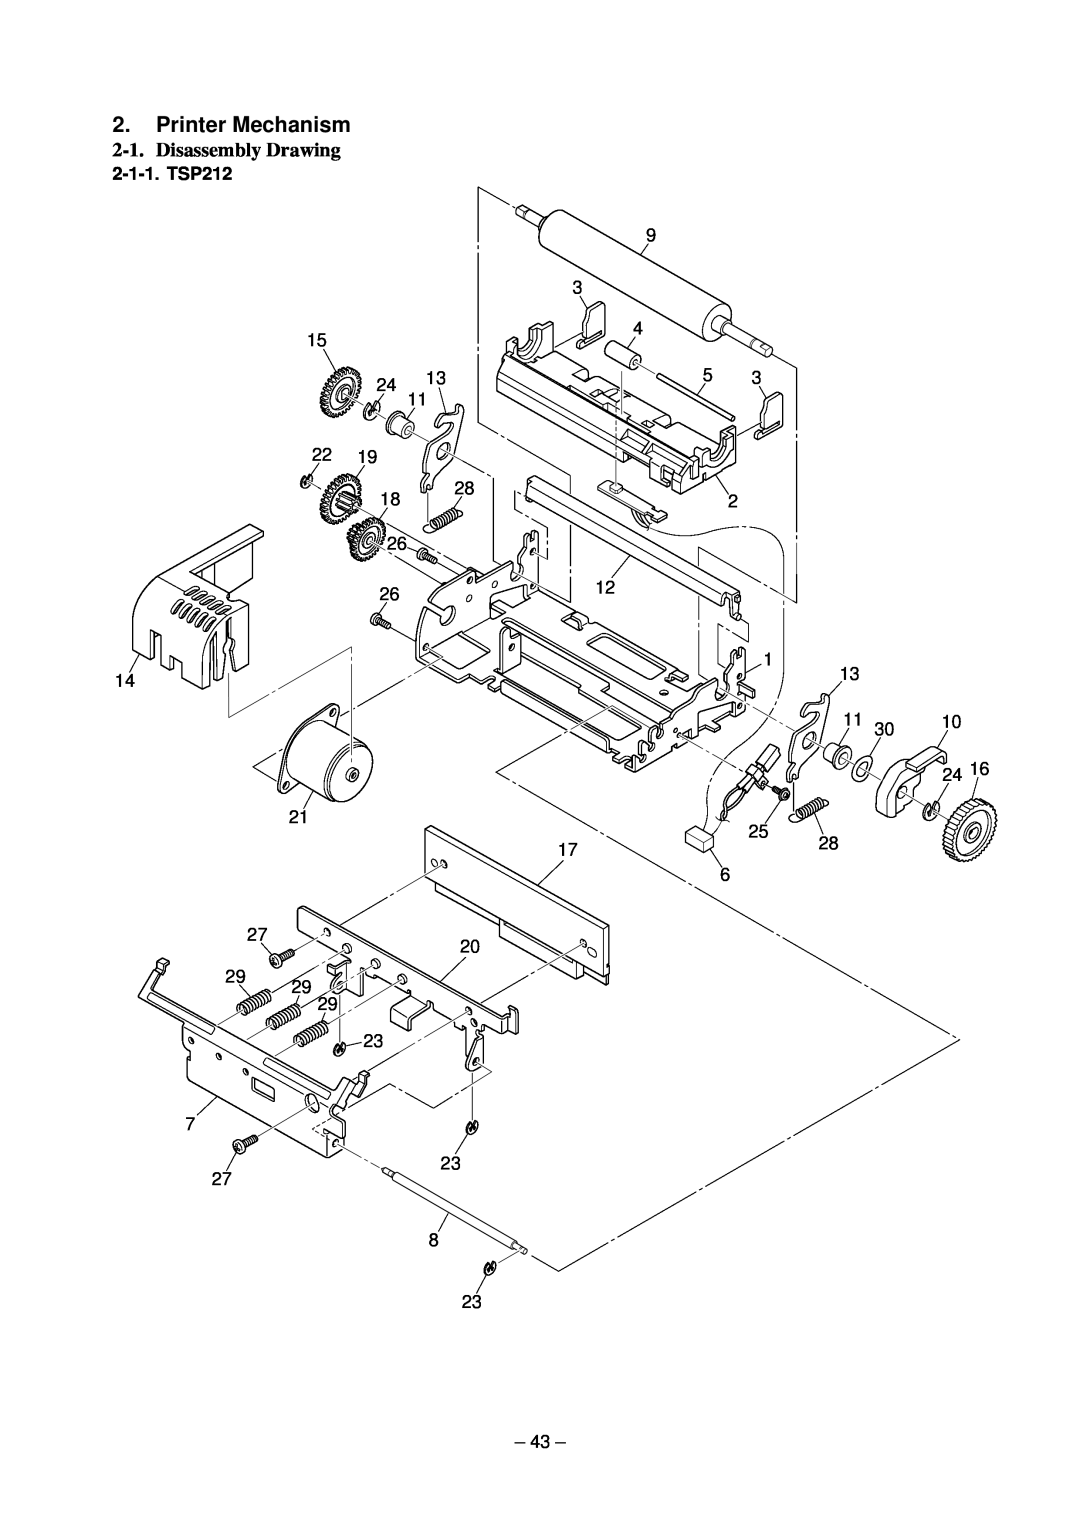 Star Micronics TSP200 technical manual Printer Mechanism, Disassembly Drawing 